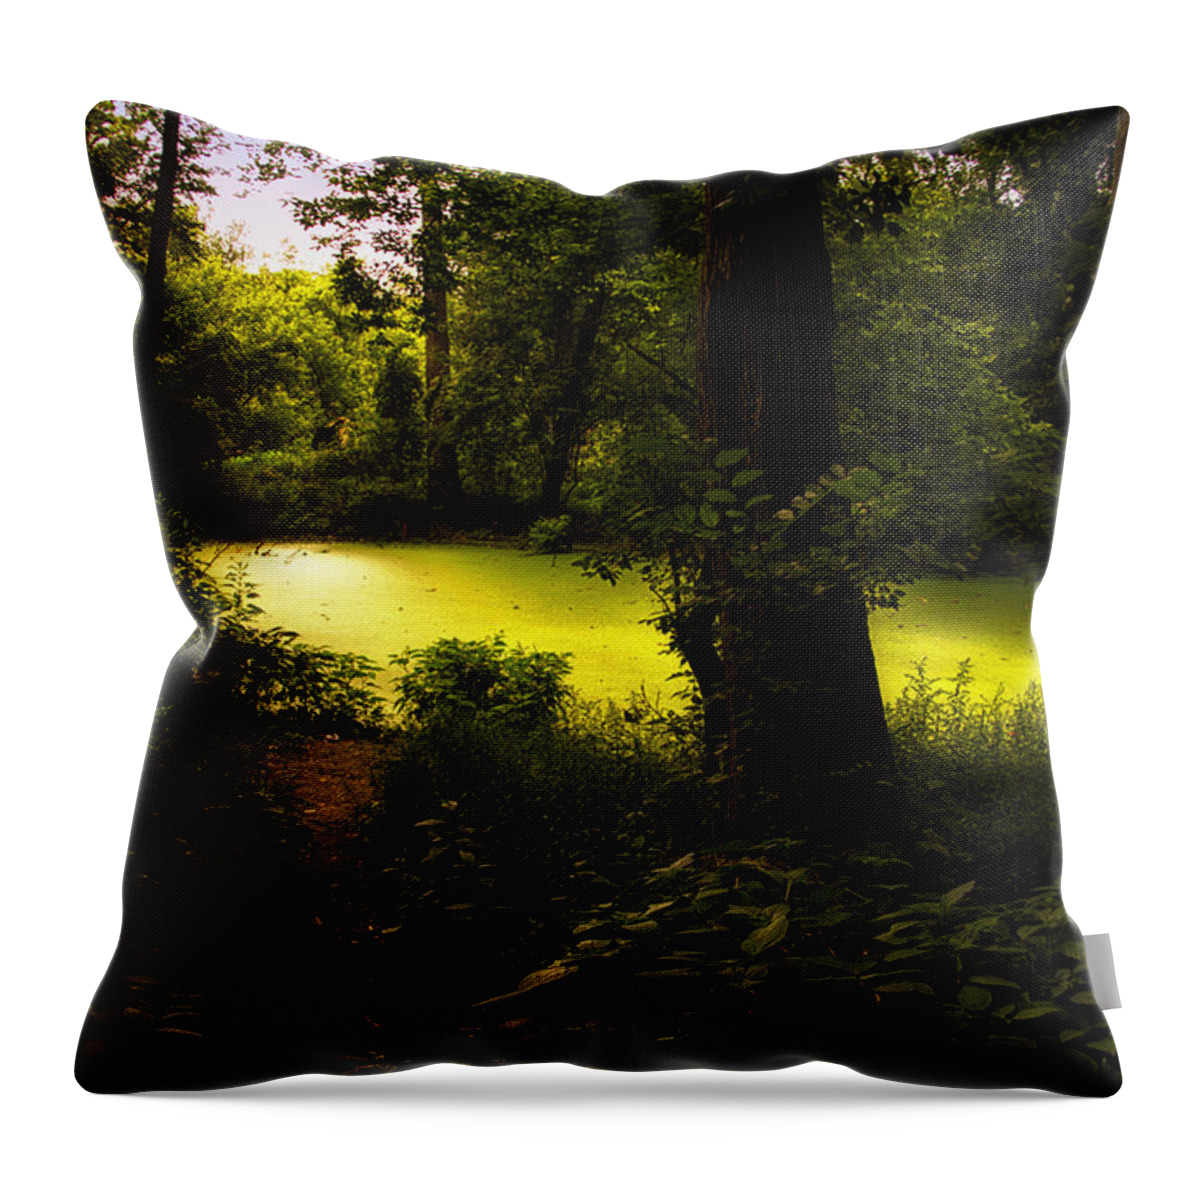 Surrealism Throw Pillow featuring the photograph The End Of The Path by Thomas Woolworth